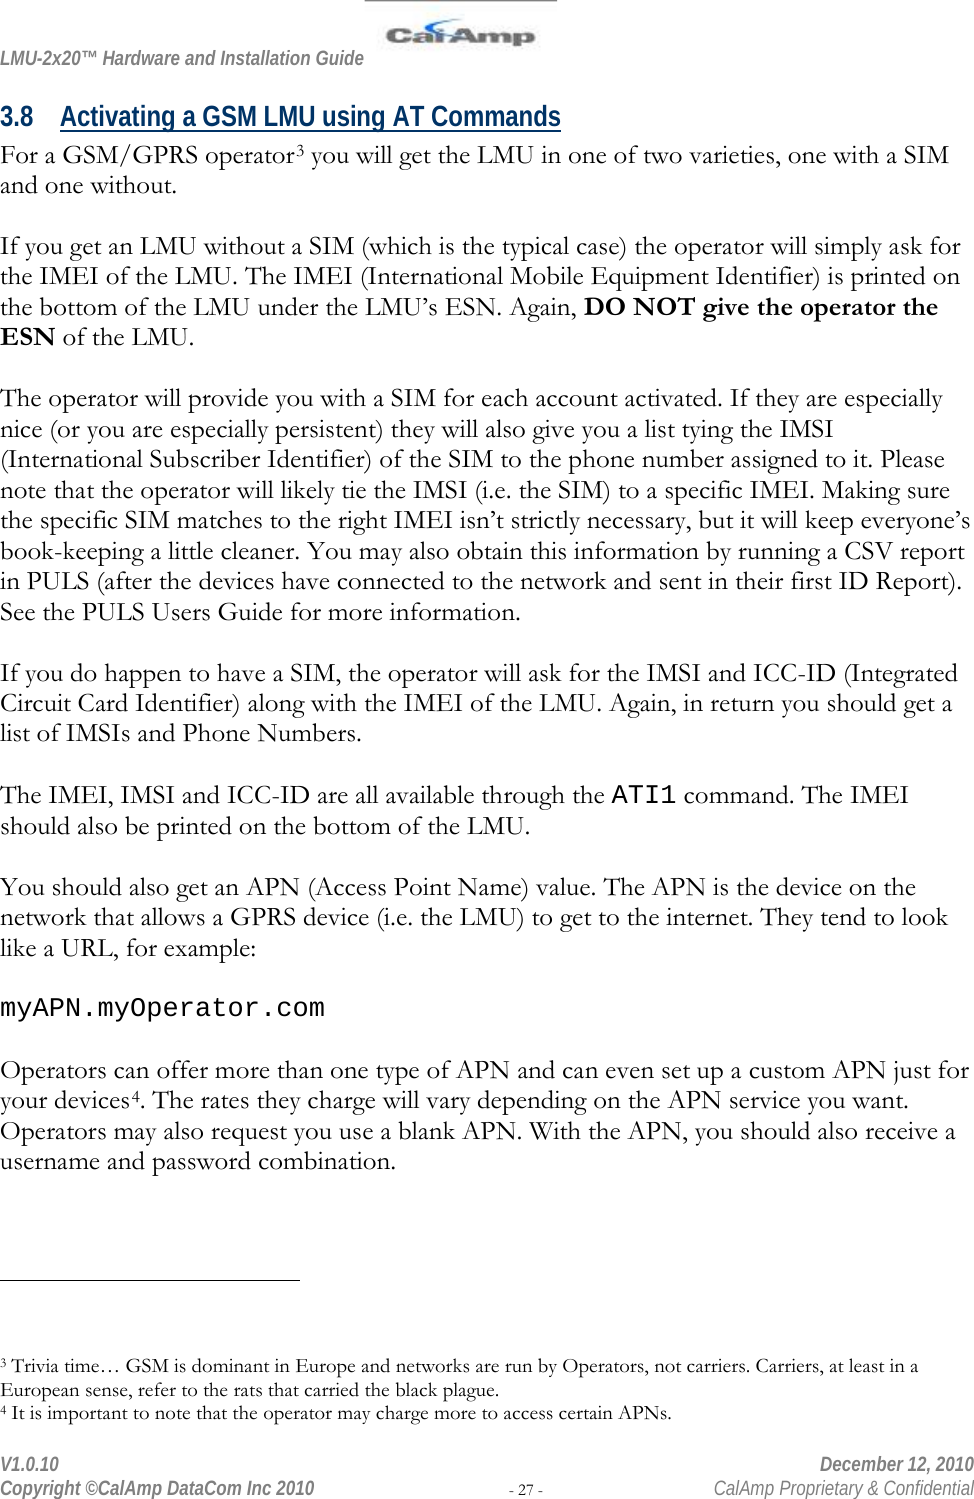 LMU-2x20™ Hardware and Installation Guide  V1.0.10    December 12, 2010 Copyright ©CalAmp DataCom Inc 2010 - 27 -  CalAmp Proprietary &amp; Confidential 3.8 Activating a GSM LMU using AT Commands For a GSM/GPRS operator3 you will get the LMU in one of two varieties, one with a SIM and one without.  If you get an LMU without a SIM (which is the typical case) the operator will simply ask for the IMEI of the LMU. The IMEI (International Mobile Equipment Identifier) is printed on the bottom of the LMU under the LMU’s ESN. Again, DO NOT give the operator the ESN of the LMU.  The operator will provide you with a SIM for each account activated. If they are especially nice (or you are especially persistent) they will also give you a list tying the IMSI (International Subscriber Identifier) of the SIM to the phone number assigned to it. Please note that the operator will likely tie the IMSI (i.e. the SIM) to a specific IMEI. Making sure the specific SIM matches to the right IMEI isn’t strictly necessary, but it will keep everyone’s book-keeping a little cleaner. You may also obtain this information by running a CSV report in PULS (after the devices have connected to the network and sent in their first ID Report). See the PULS Users Guide for more information.  If you do happen to have a SIM, the operator will ask for the IMSI and ICC-ID (Integrated Circuit Card Identifier) along with the IMEI of the LMU. Again, in return you should get a list of IMSIs and Phone Numbers.   The IMEI, IMSI and ICC-ID are all available through the ATI1 command. The IMEI should also be printed on the bottom of the LMU.  You should also get an APN (Access Point Name) value. The APN is the device on the network that allows a GPRS device (i.e. the LMU) to get to the internet. They tend to look like a URL, for example:  myAPN.myOperator.com  Operators can offer more than one type of APN and can even set up a custom APN just for your devices4. The rates they charge will vary depending on the APN service you want. Operators may also request you use a blank APN. With the APN, you should also receive a username and password combination.                                                  3 Trivia time… GSM is dominant in Europe and networks are run by Operators, not carriers. Carriers, at least in a European sense, refer to the rats that carried the black plague. 4 It is important to note that the operator may charge more to access certain APNs.  